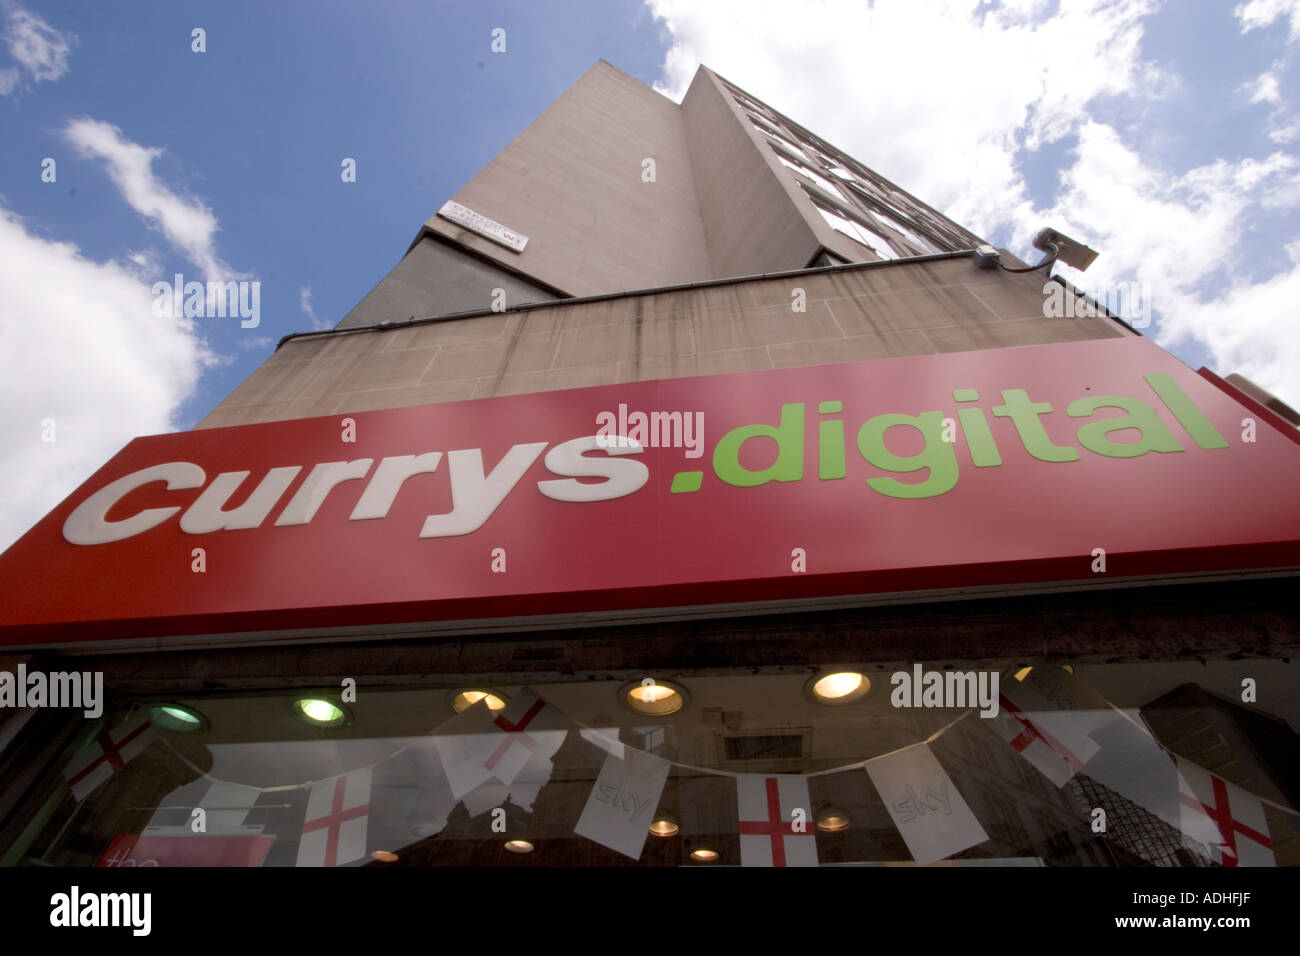 Currys.digital Currys digital Currys Digital Currys electrical retail outlet Branch Oxford Street London UK Stock Photo